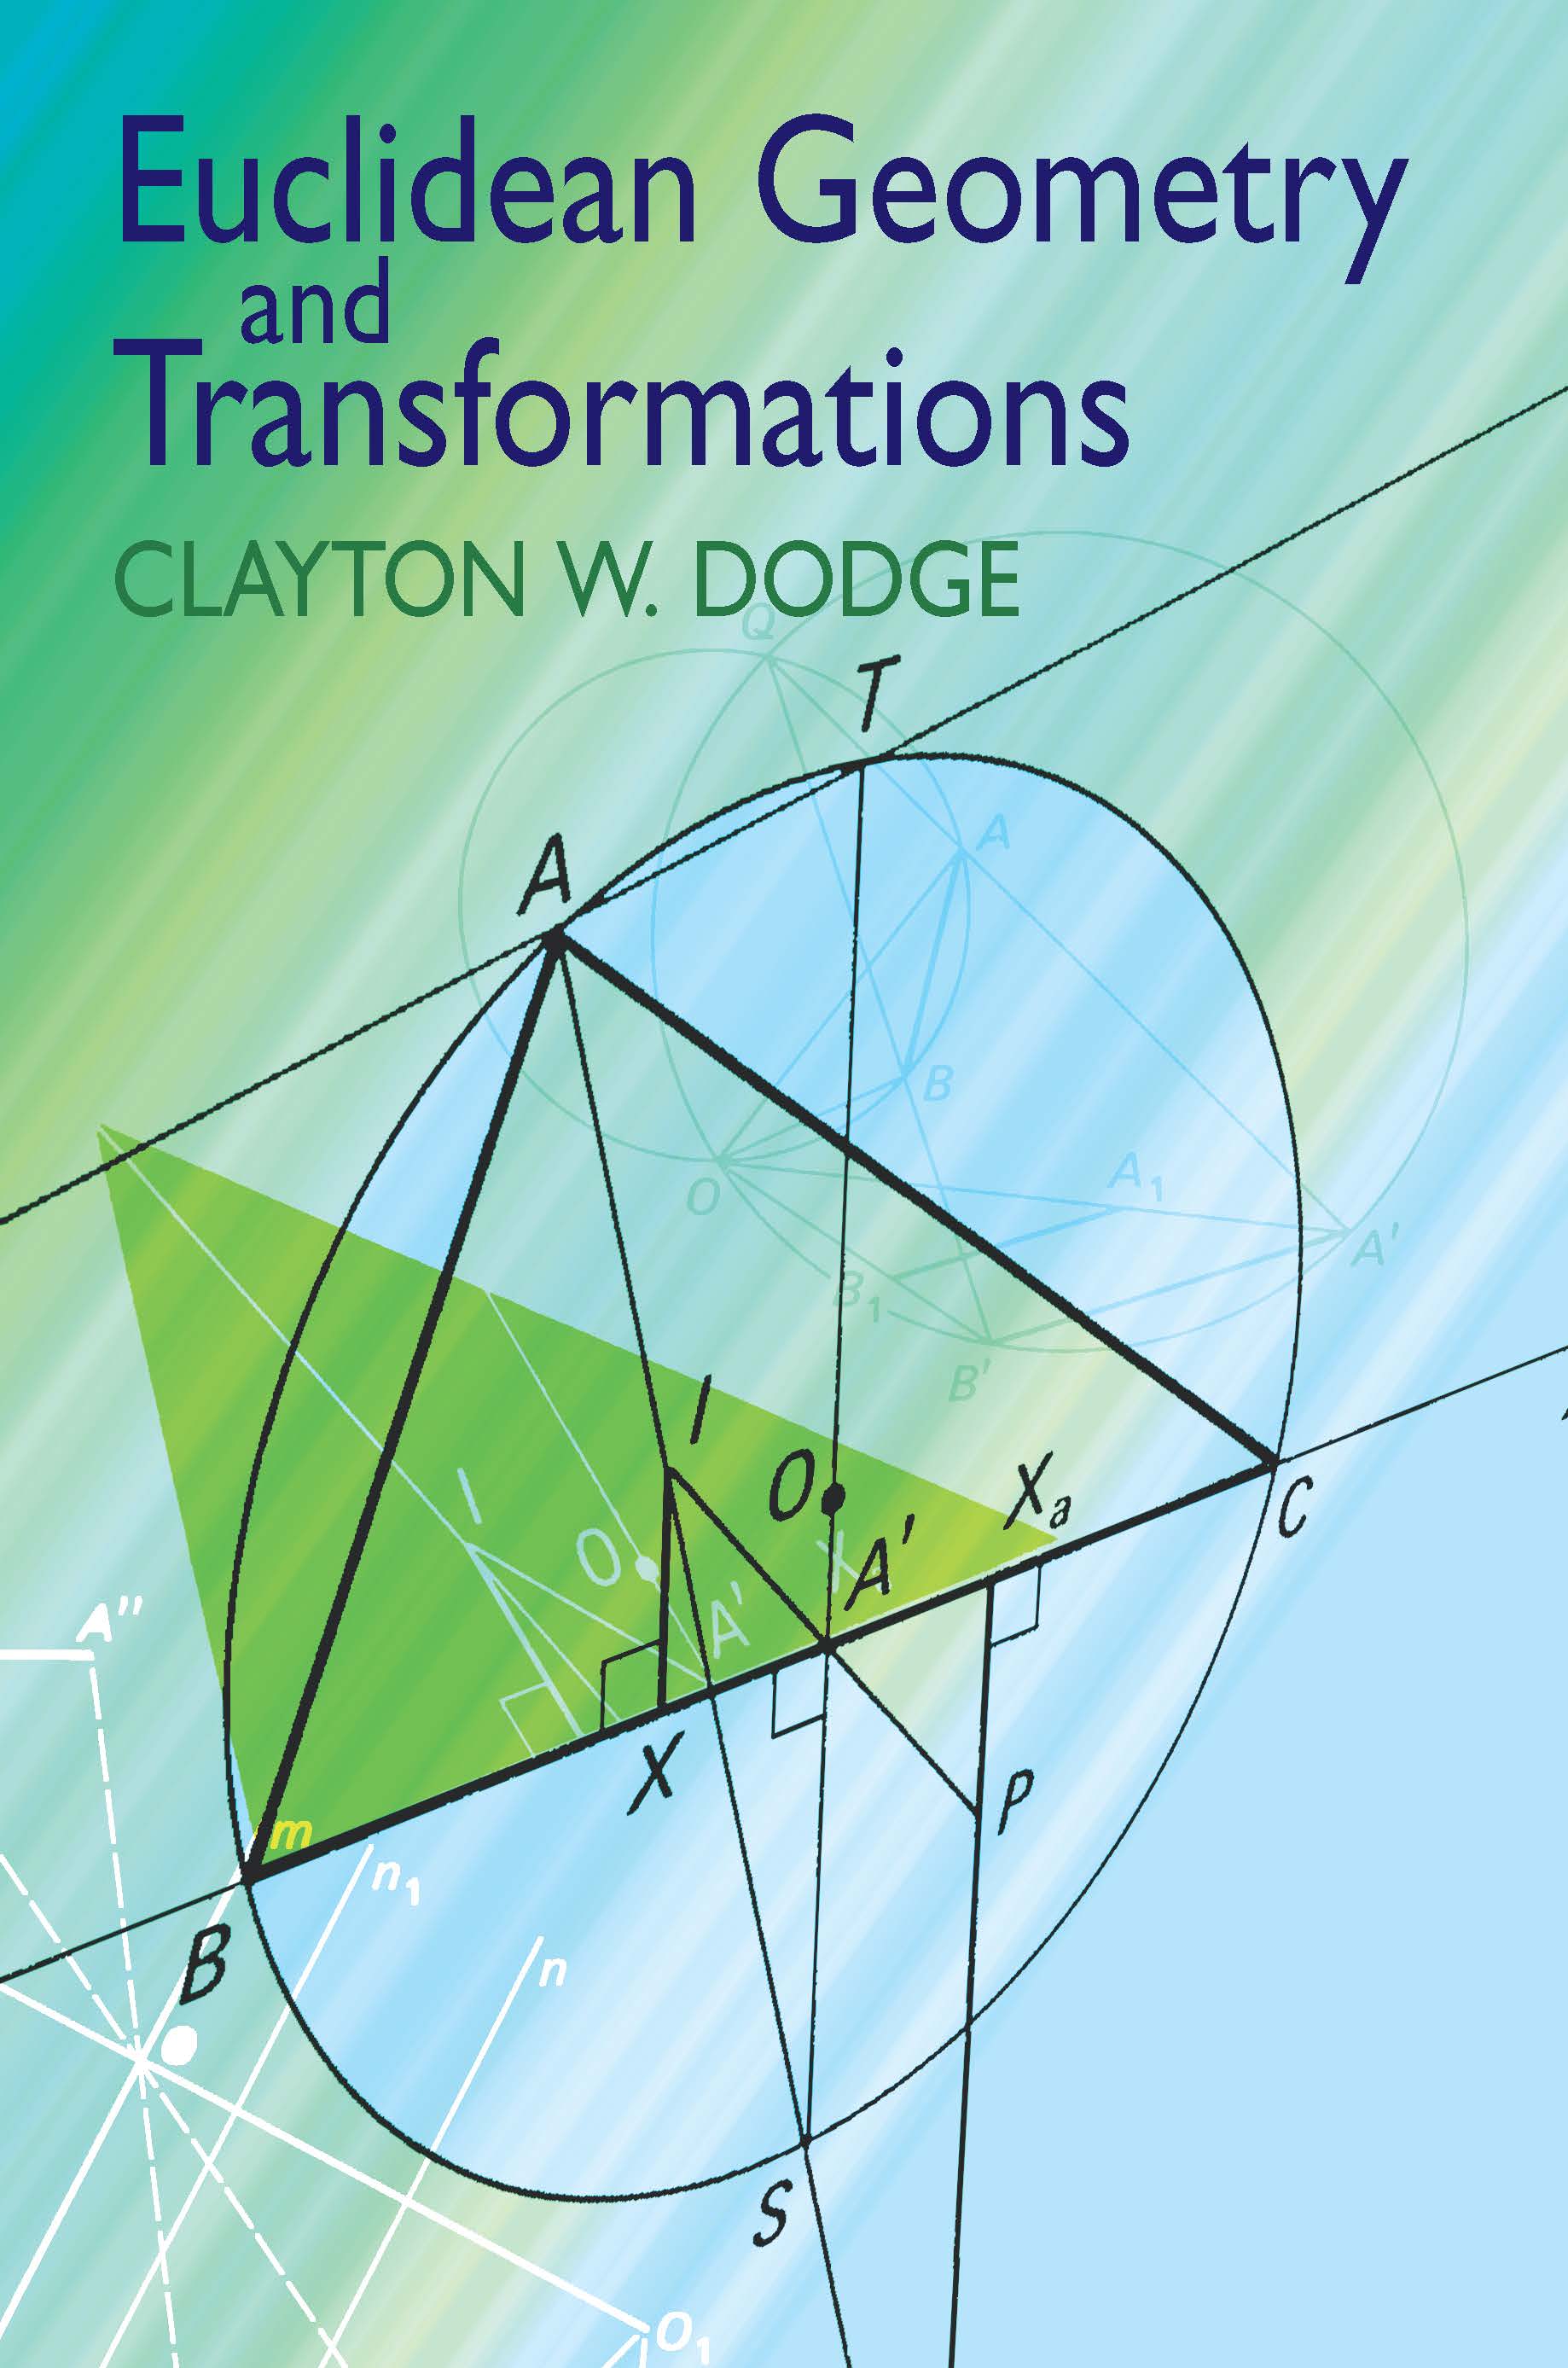 Euclidean Geometry and Transformations - Clayton W. Dodge